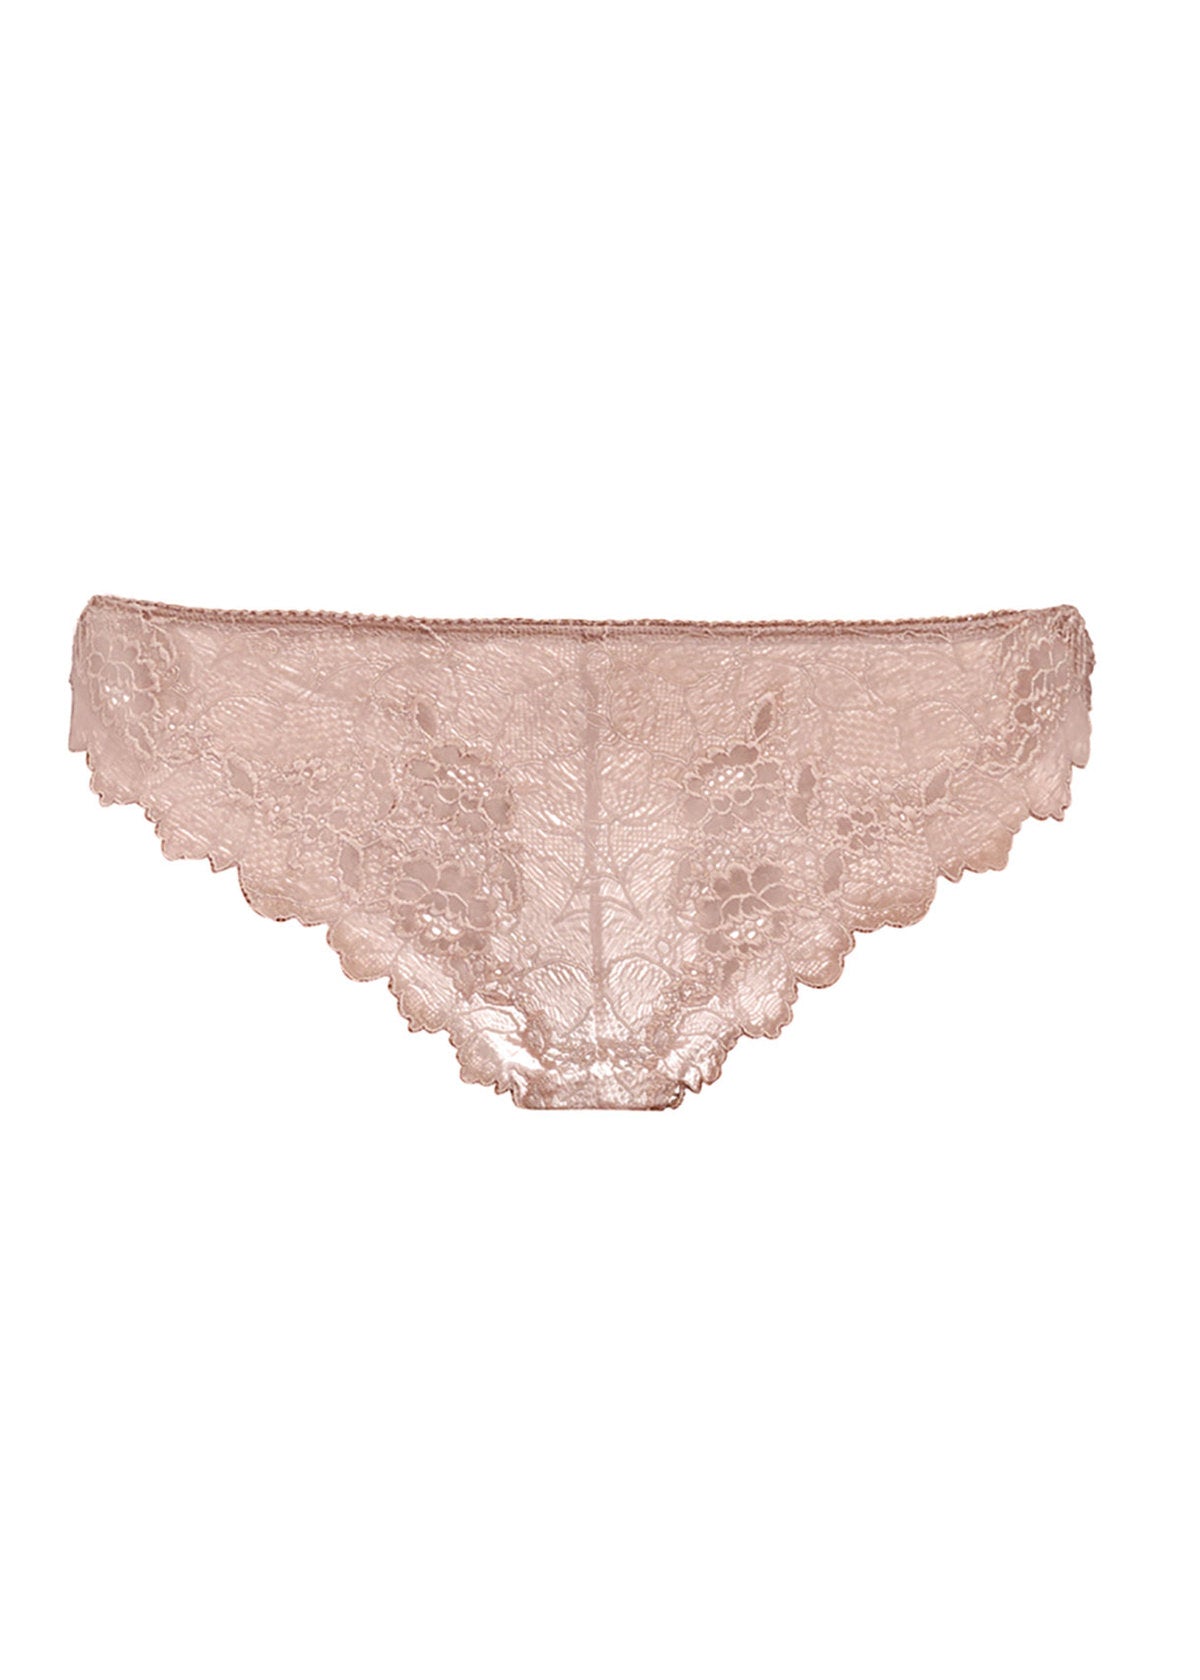 Wacoal Lace Perfection Panty, Cafe Creme